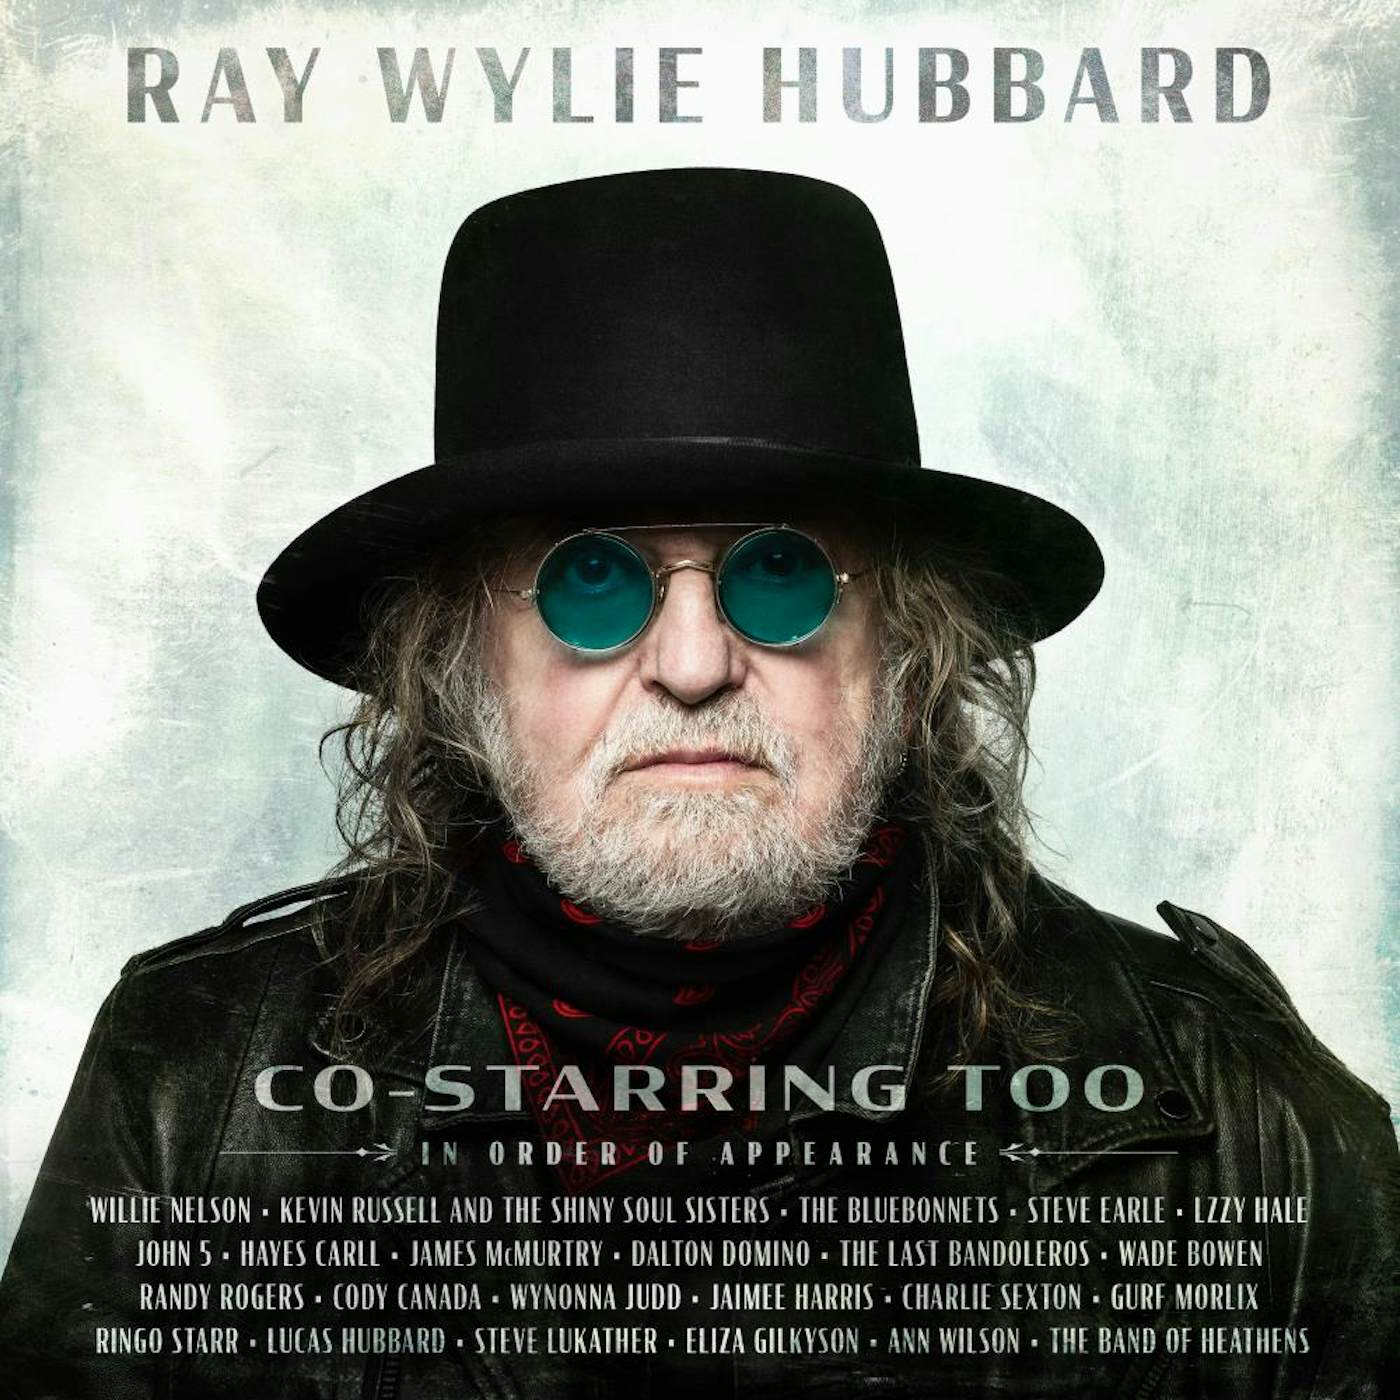 Ray Wylie Hubbard Co-Starring Too Vinyl Record